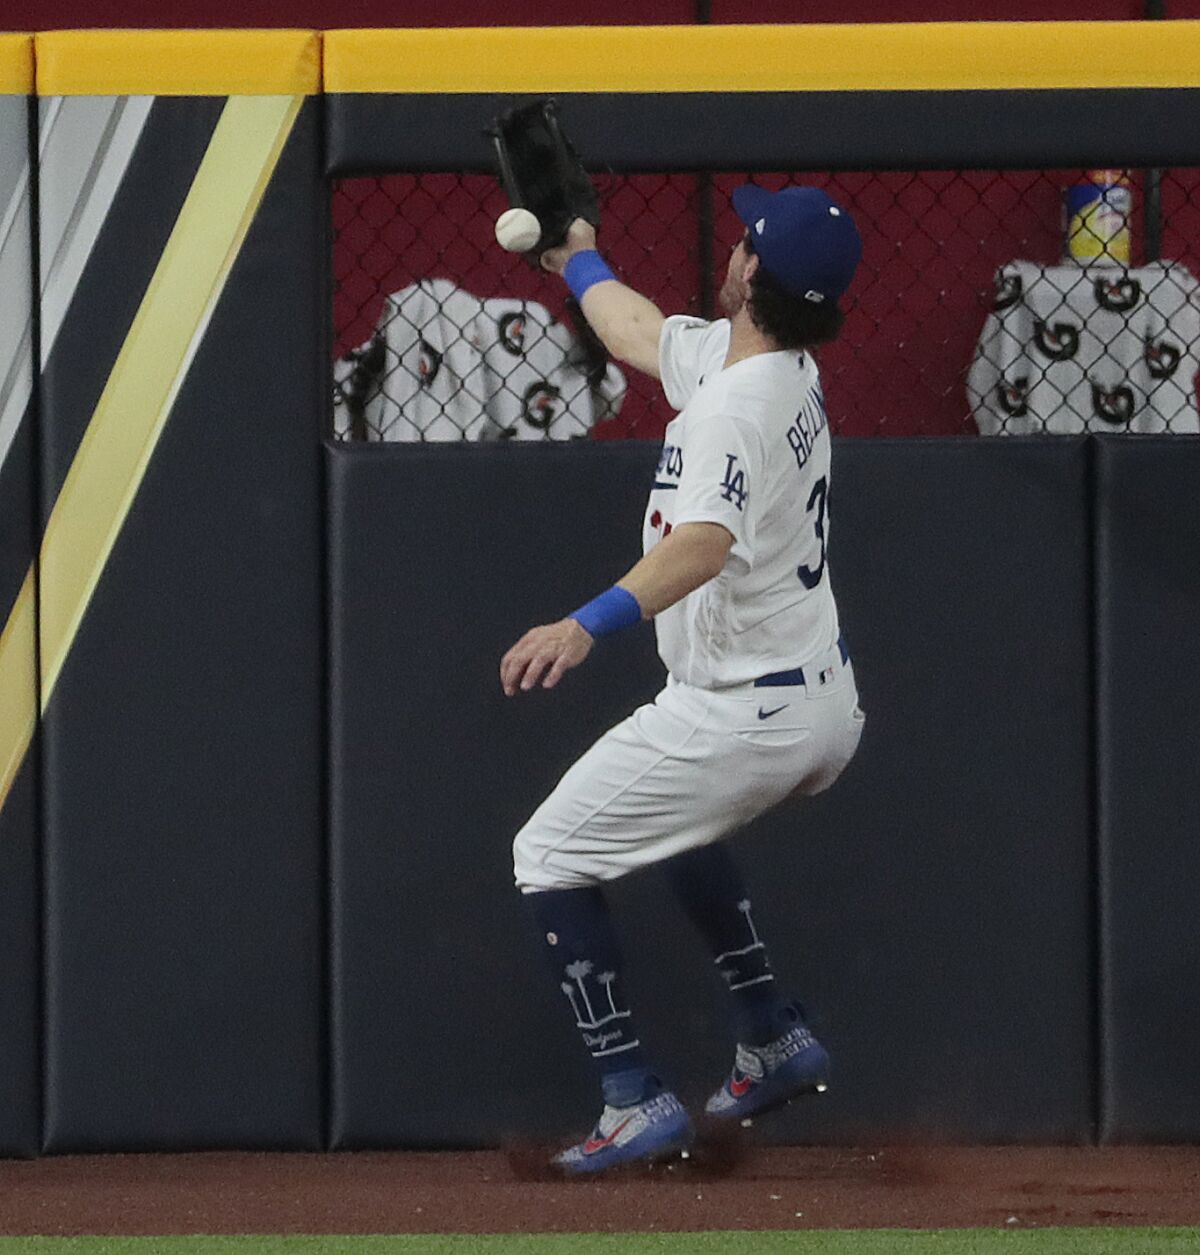 Dodgers center fielder Cody Bellinger can't make a catch on a double by Tampa Bay Rays third baseman Joey Wendle.